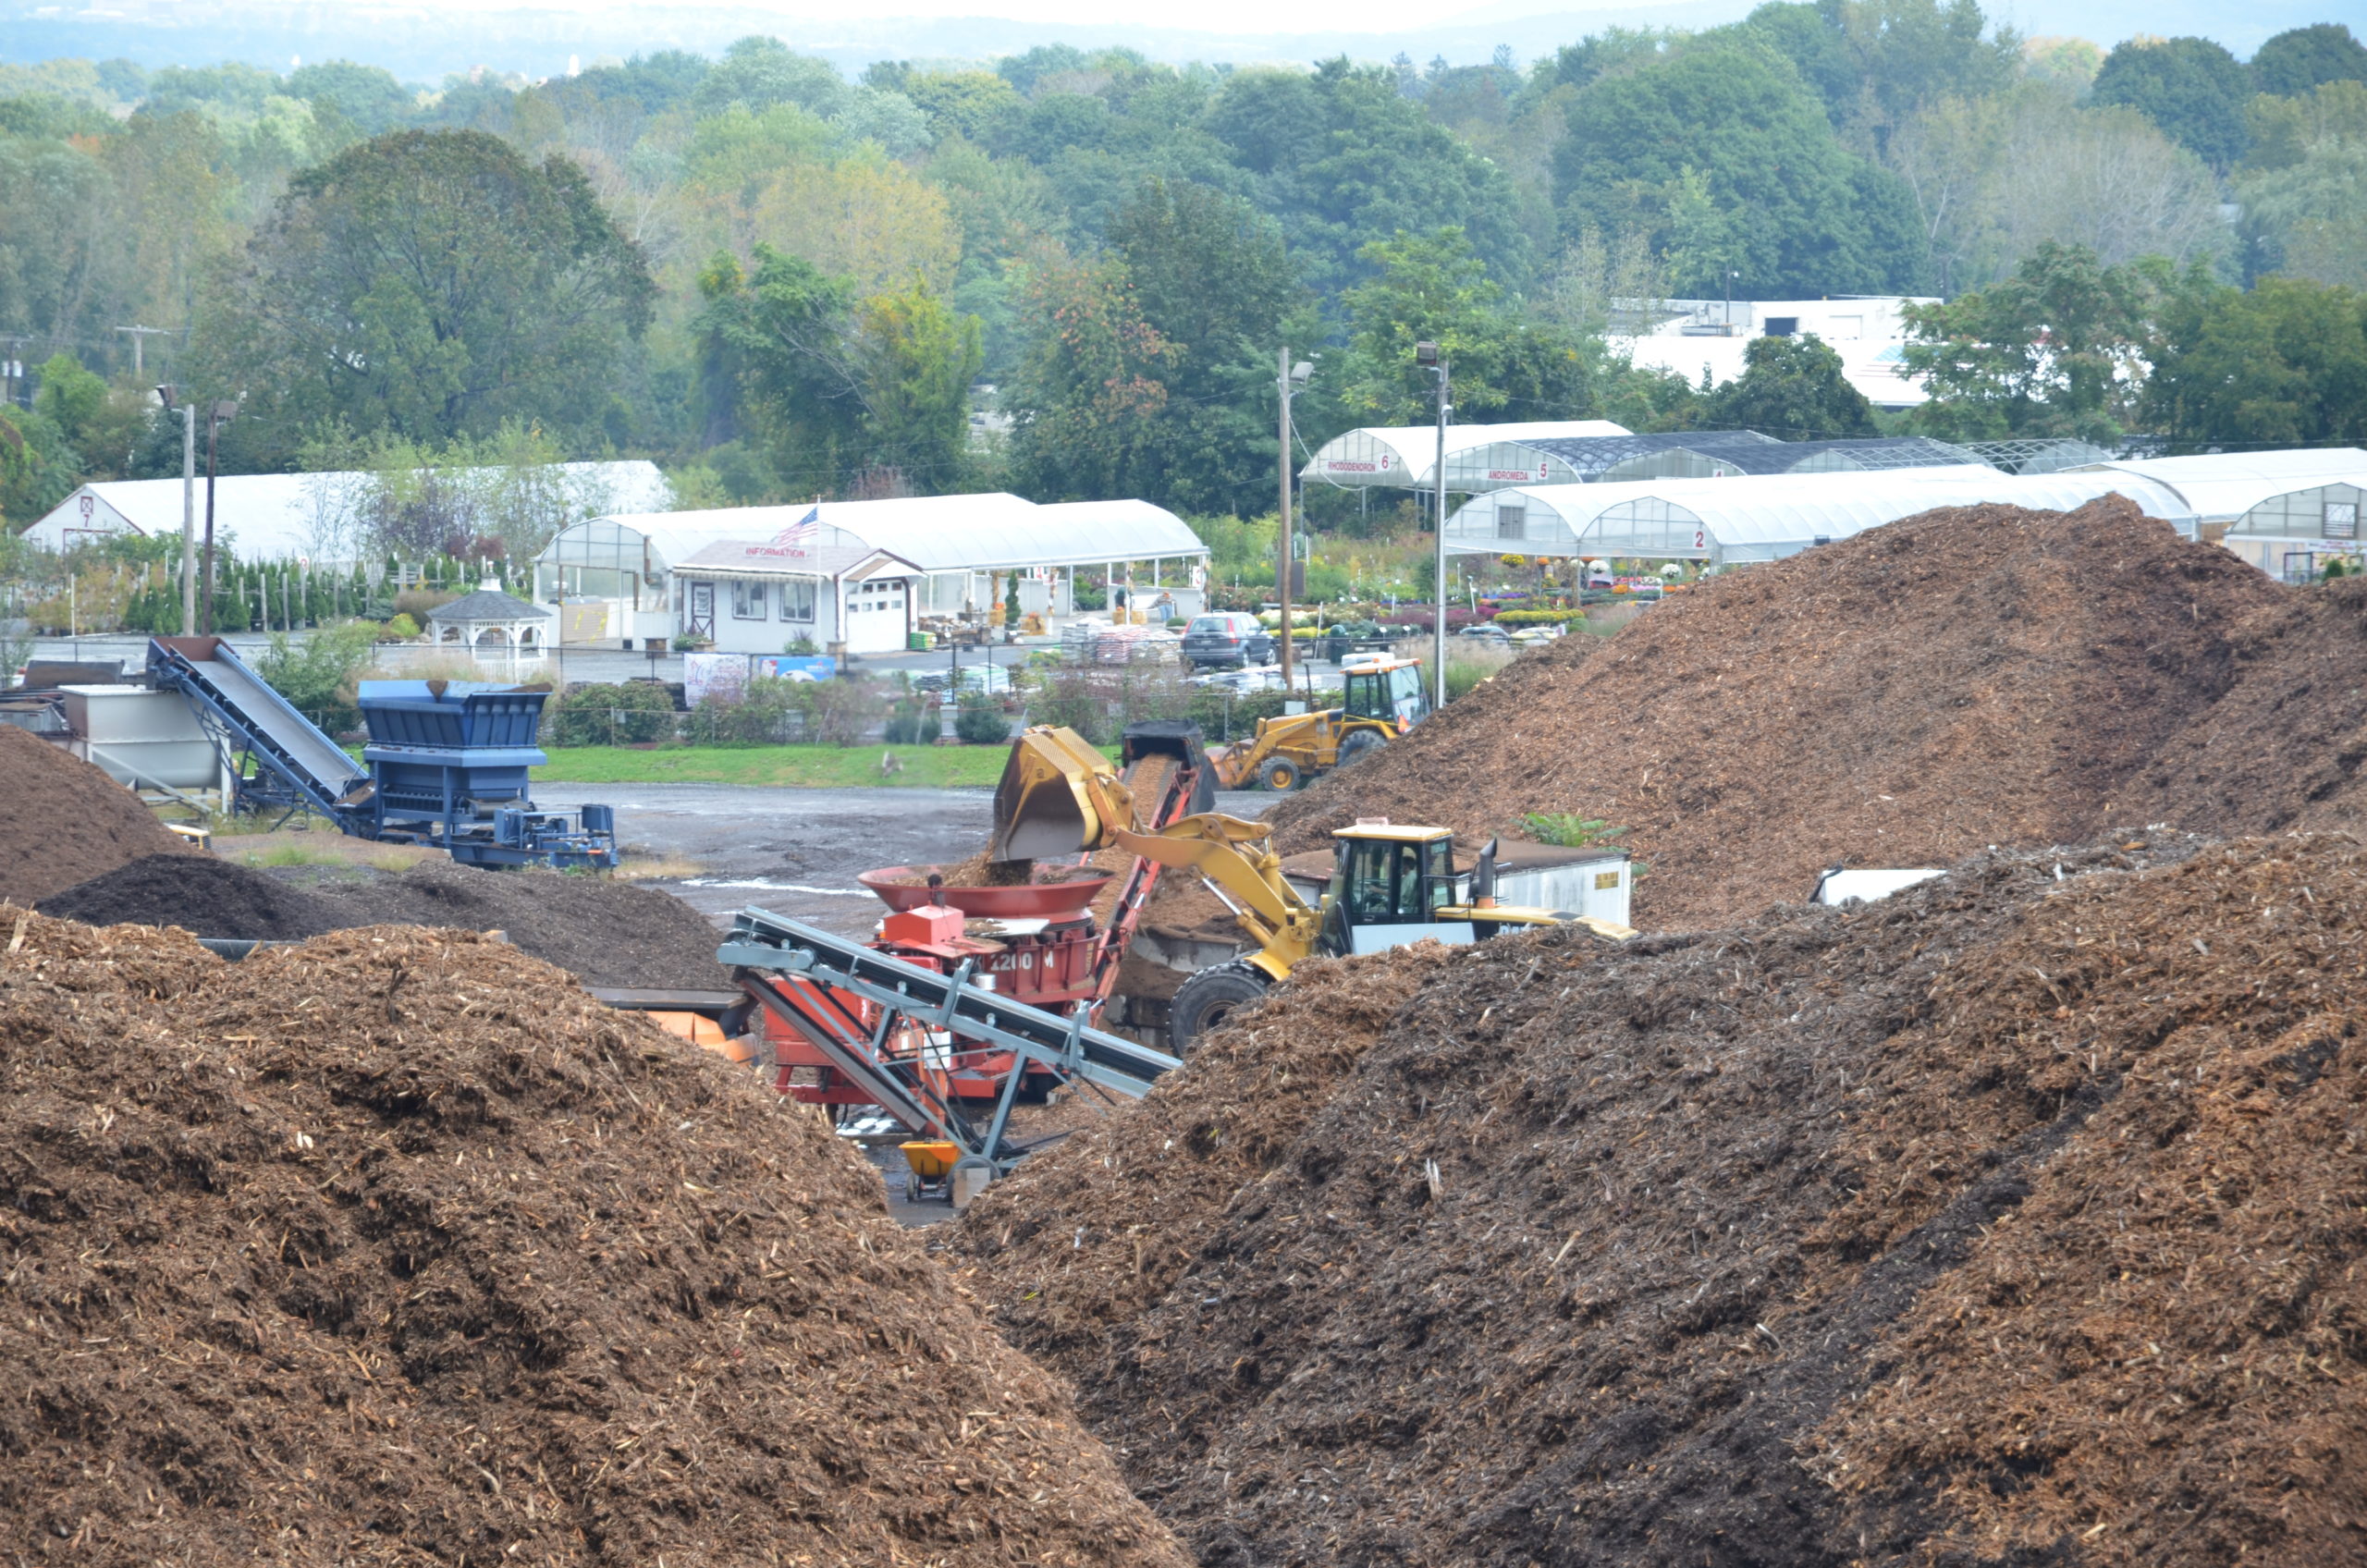 Commercial and municipal composting operations produce both mulches and composts.  These are good for a number of garden applications but don’t assume that they are 